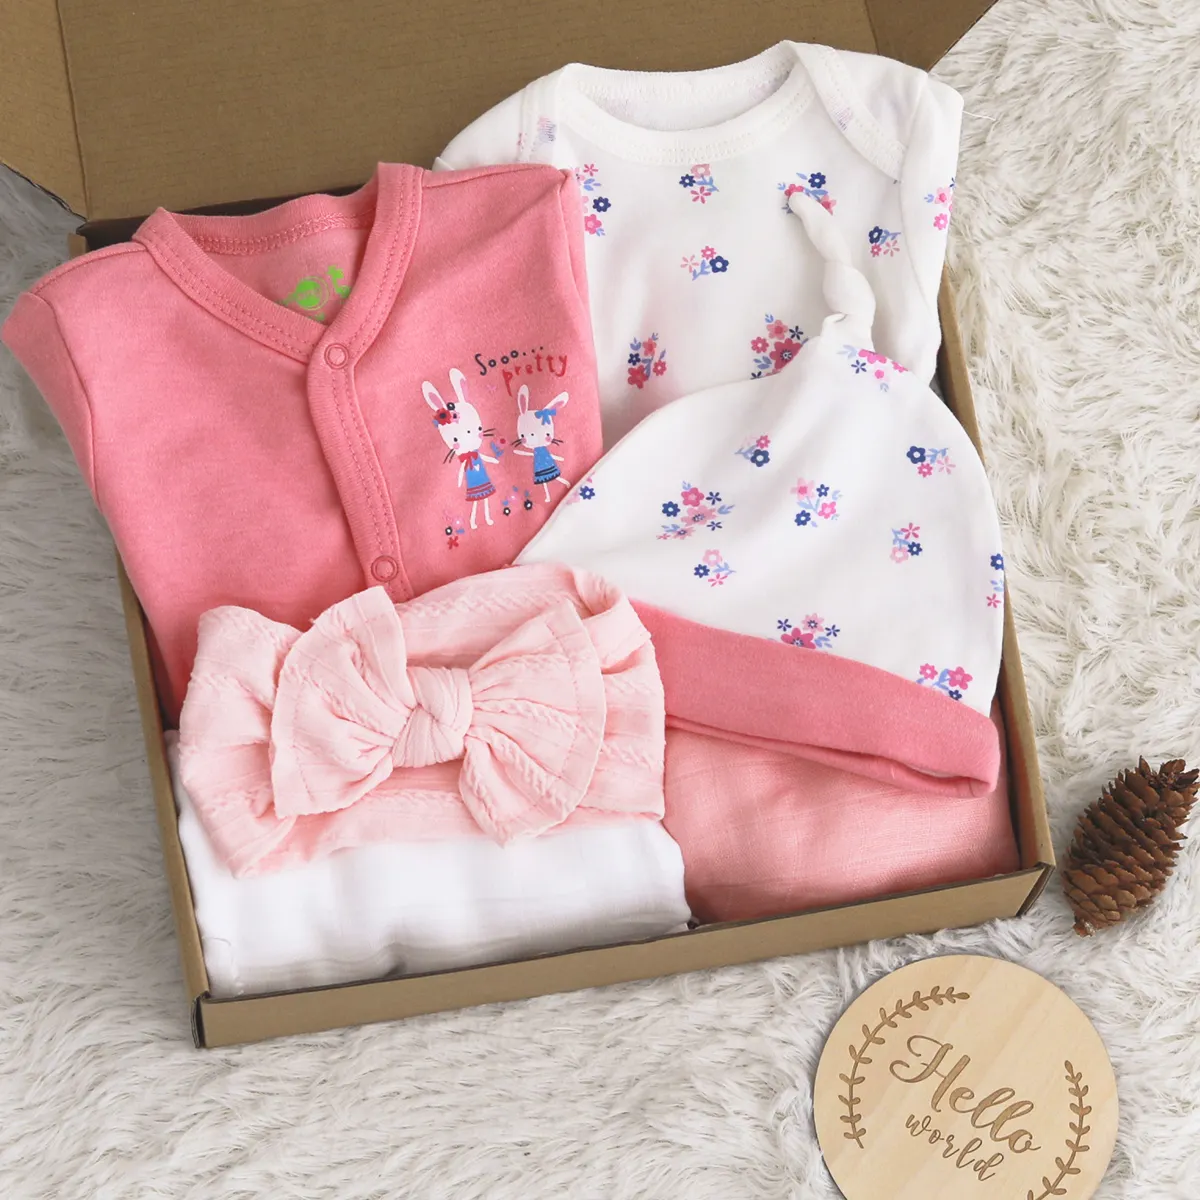 100 Cotton Romper Full Month New Born Baby Clothing Gift Set Gift Set Organic Newborn Boy Clothes Set , Baby Girl Clothes 2 PC//